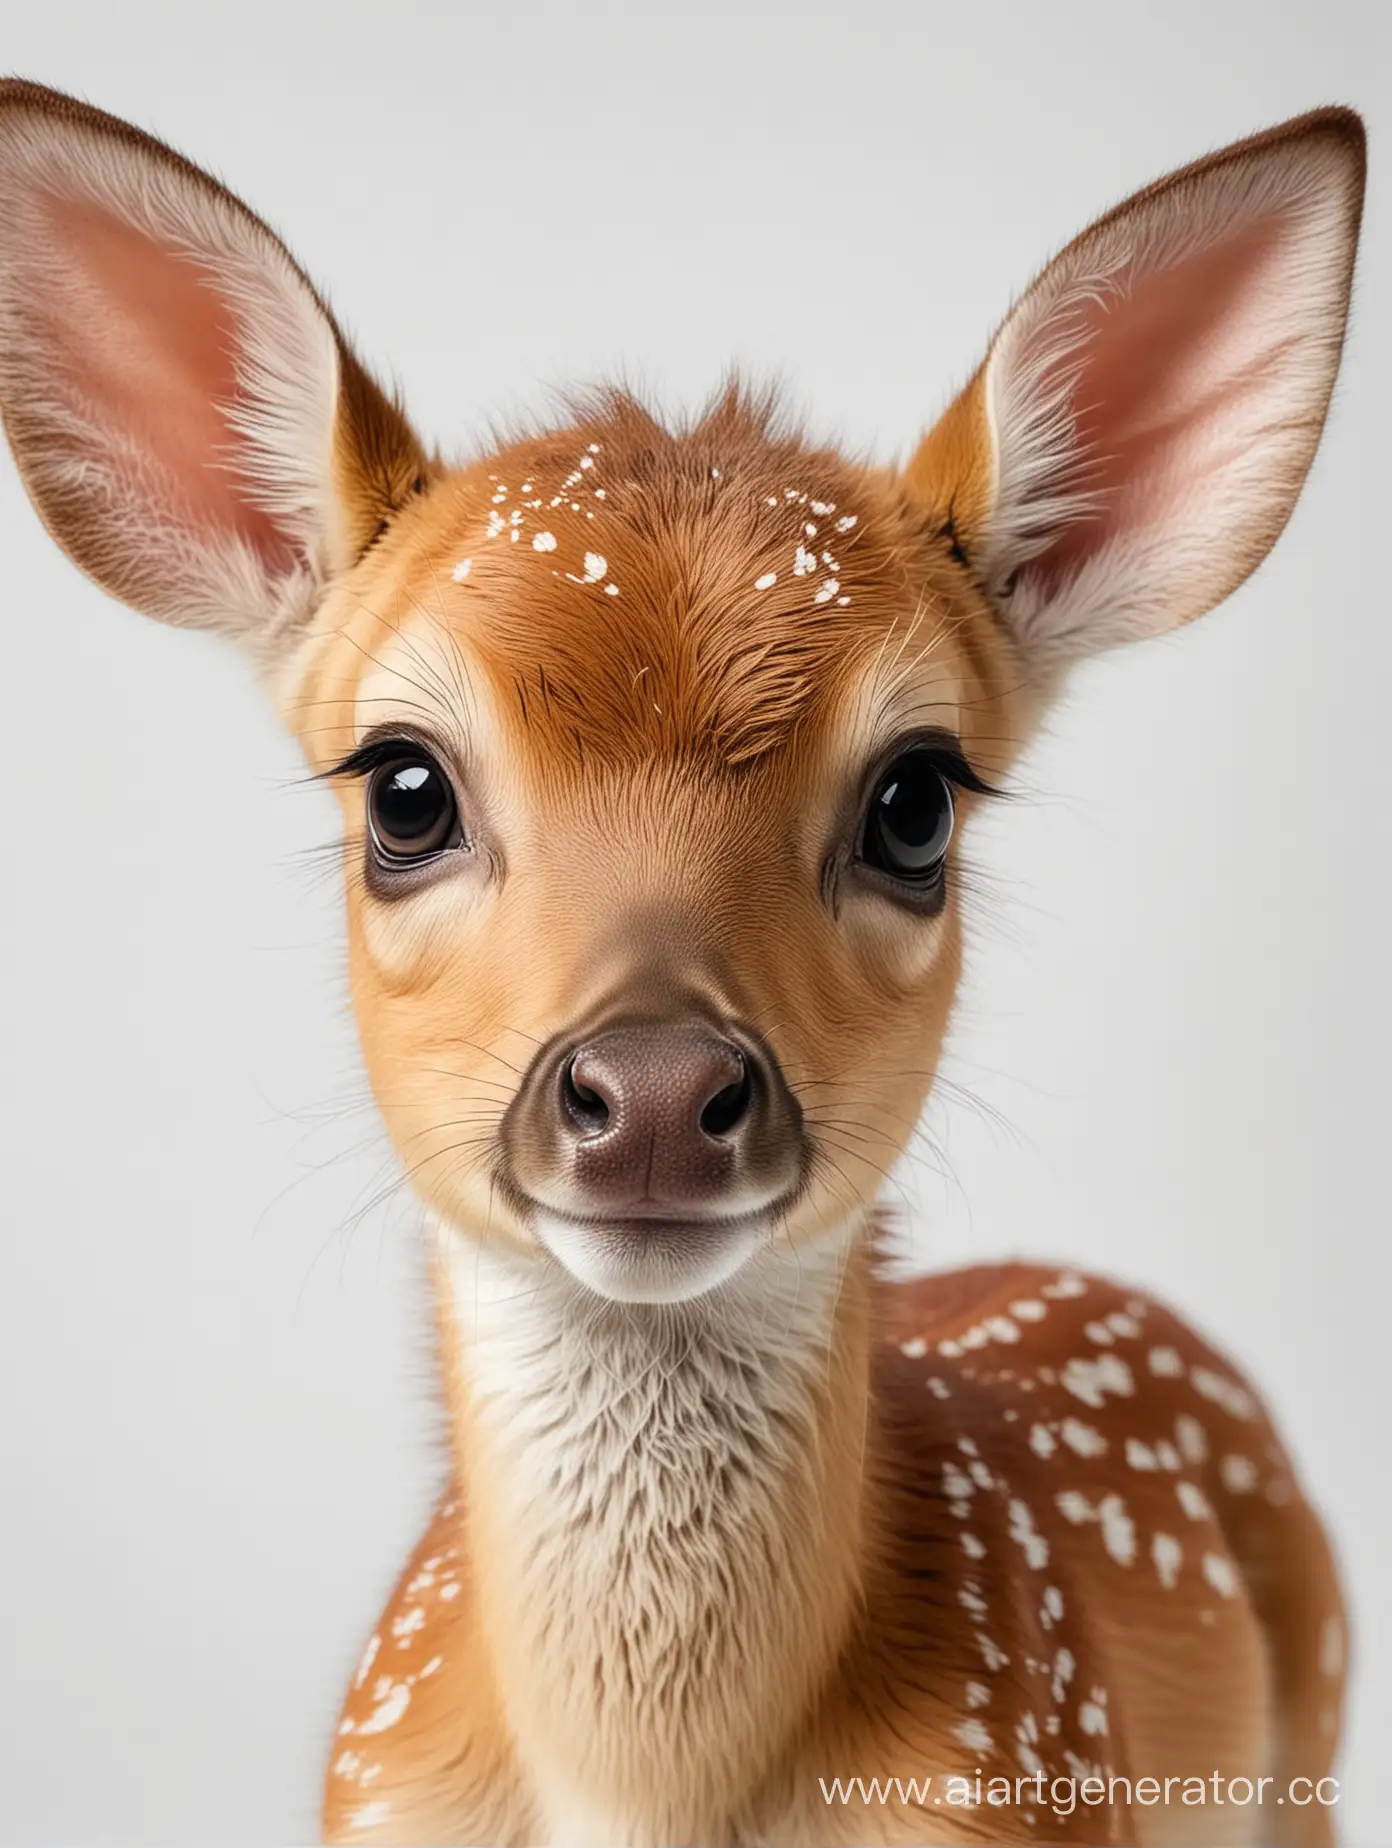 The face of a little cute fawn. White background